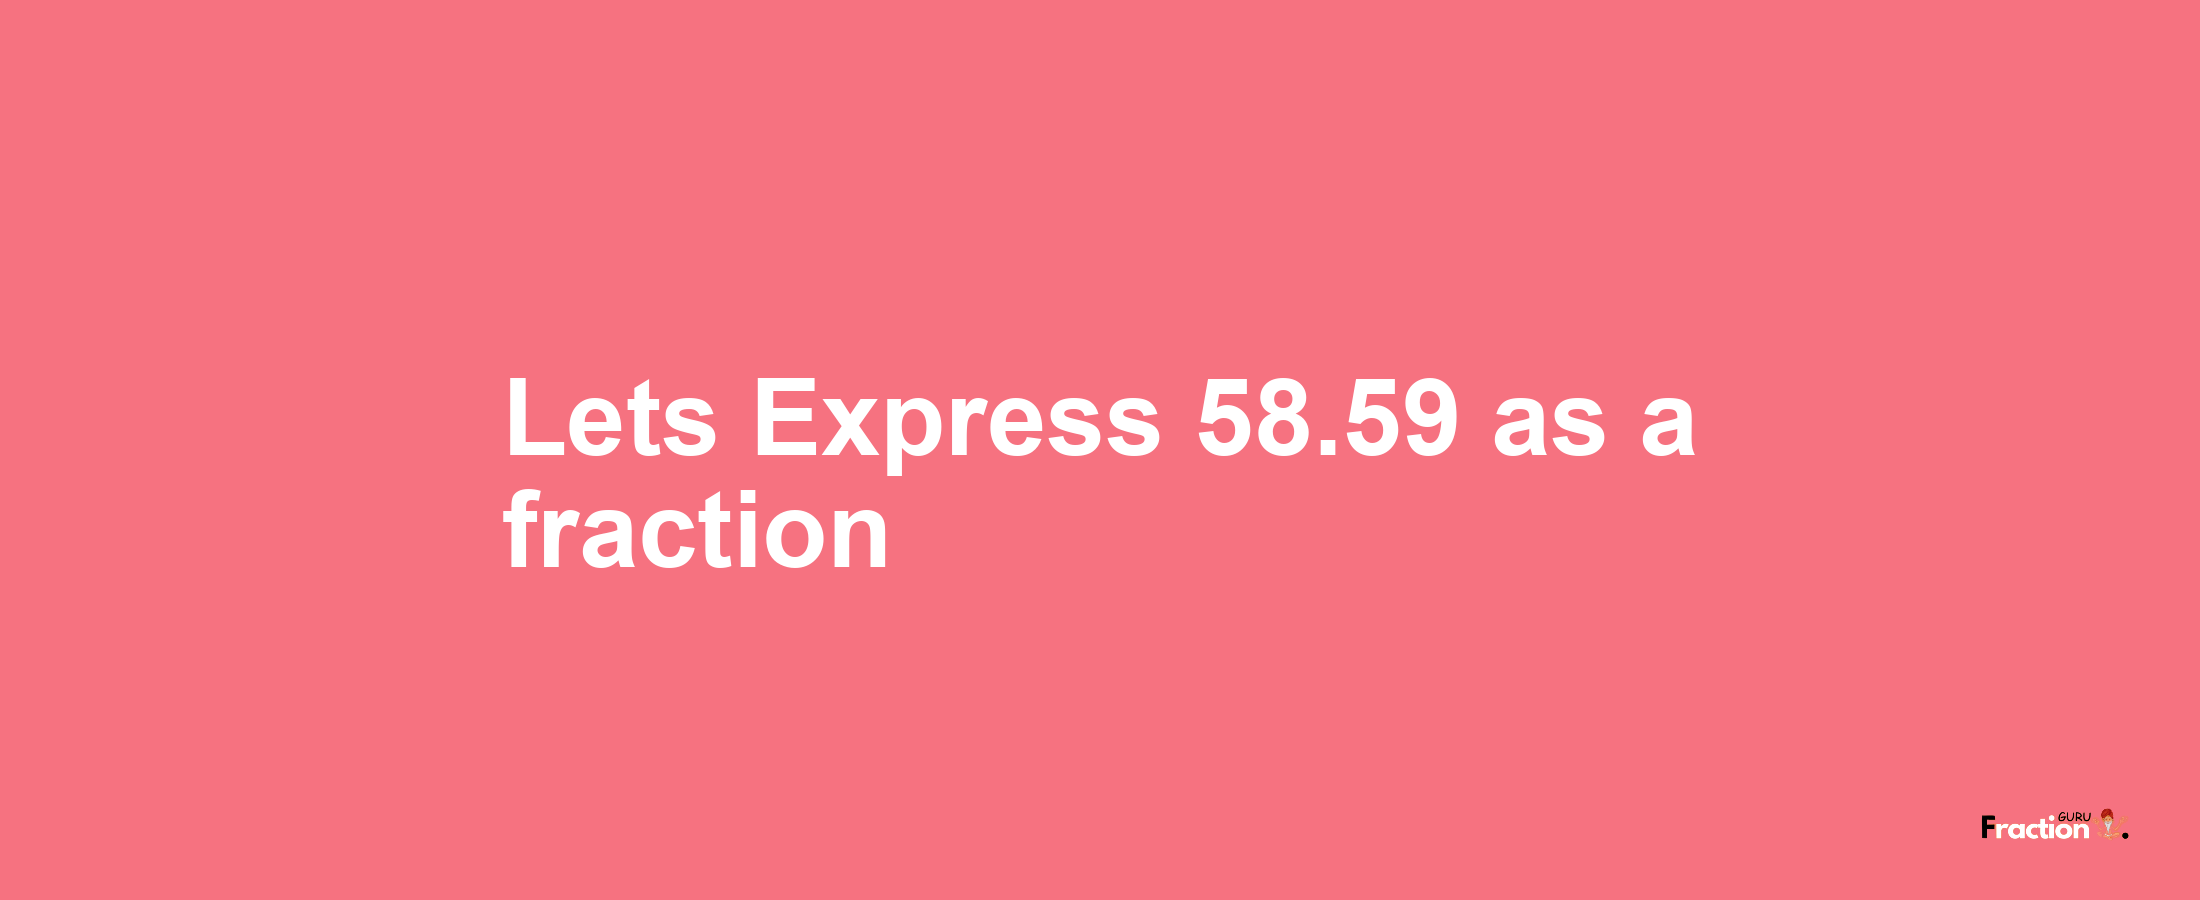 Lets Express 58.59 as afraction